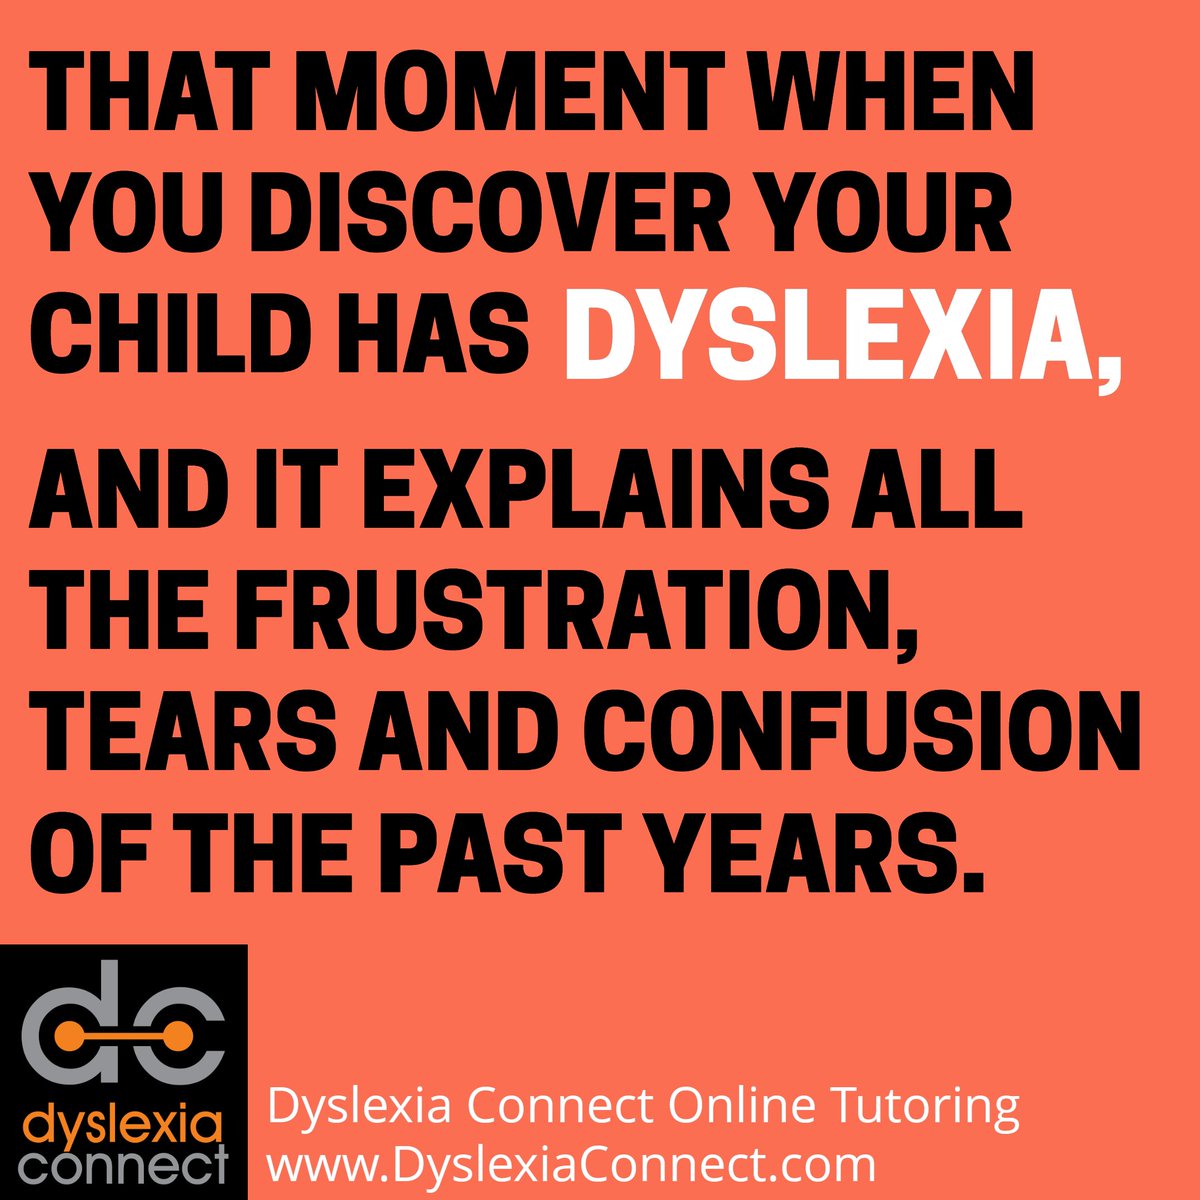 For many parents, the moment when they discover that their child has dyslexia is a relief, because it explains so much that was unknown, confusing and frustrating. Once the issue is identified, there is path forward! DyslexiaConnect.com #dyslexia #ADHD #dysgraphia